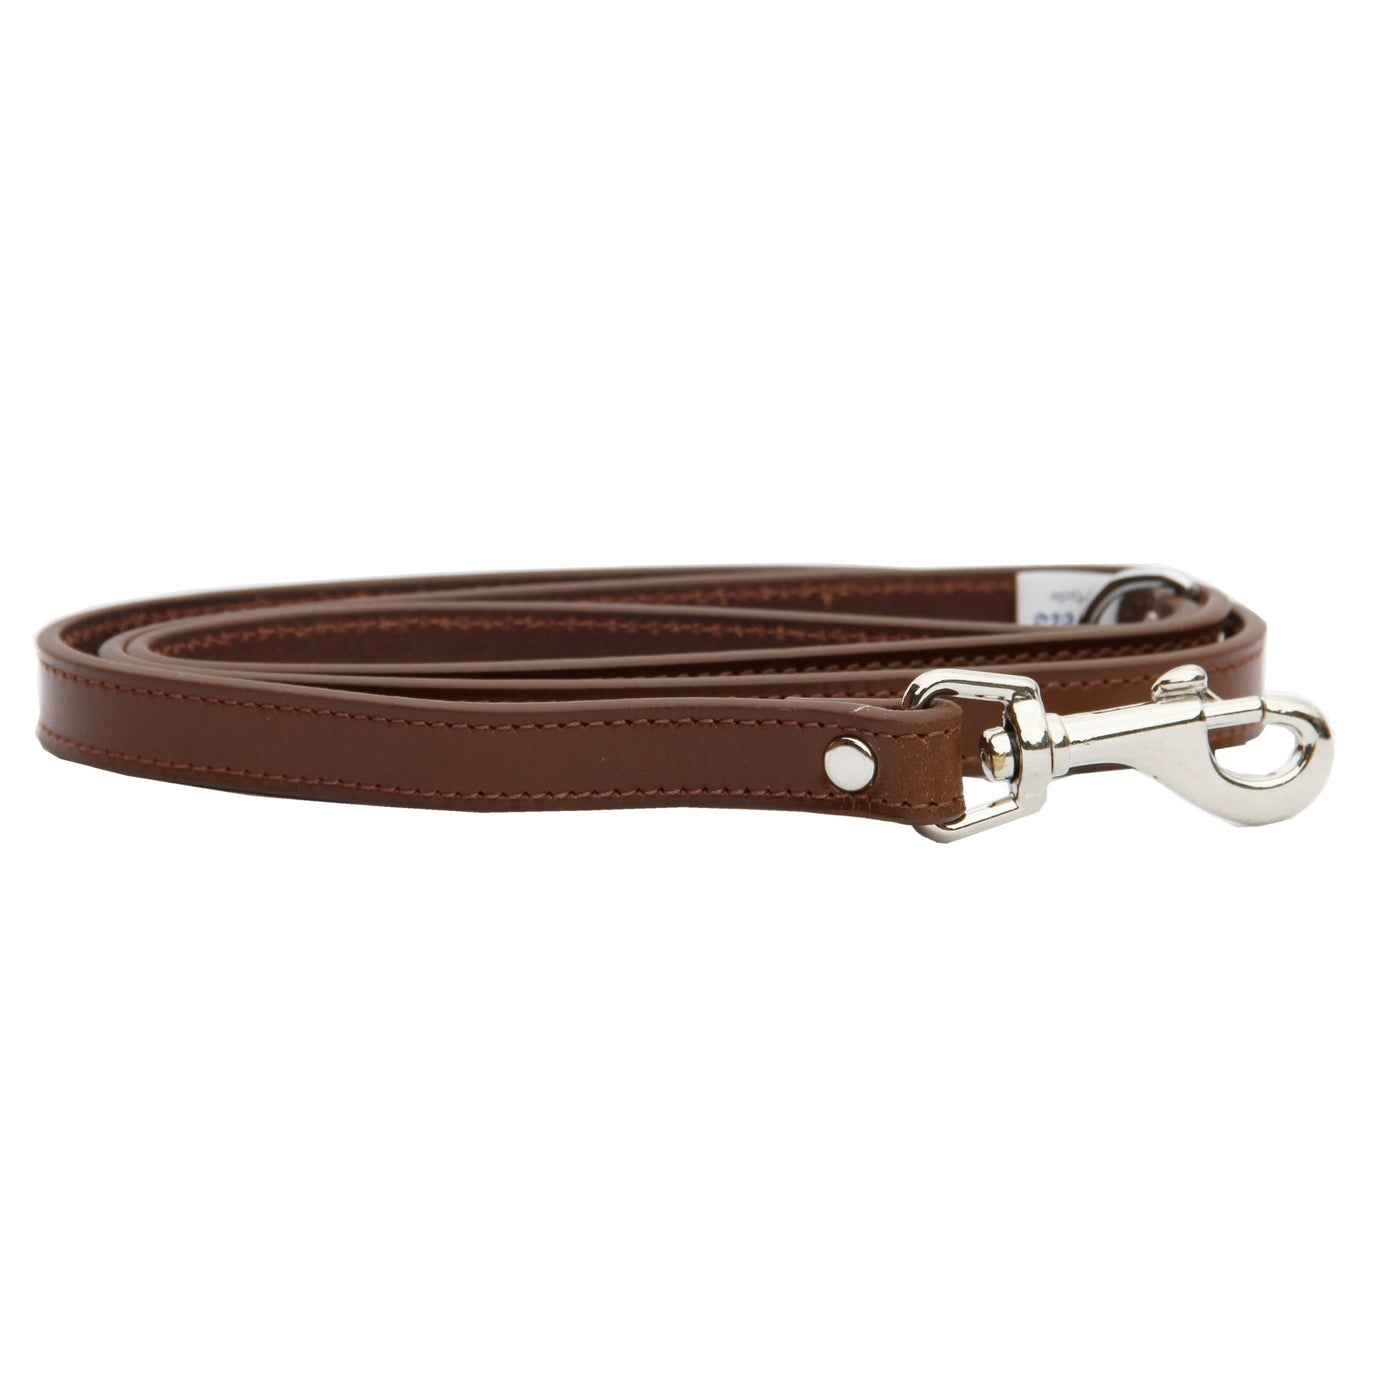 Beau Pets Leather Deluxe Sewn Lead 16mmx100cm